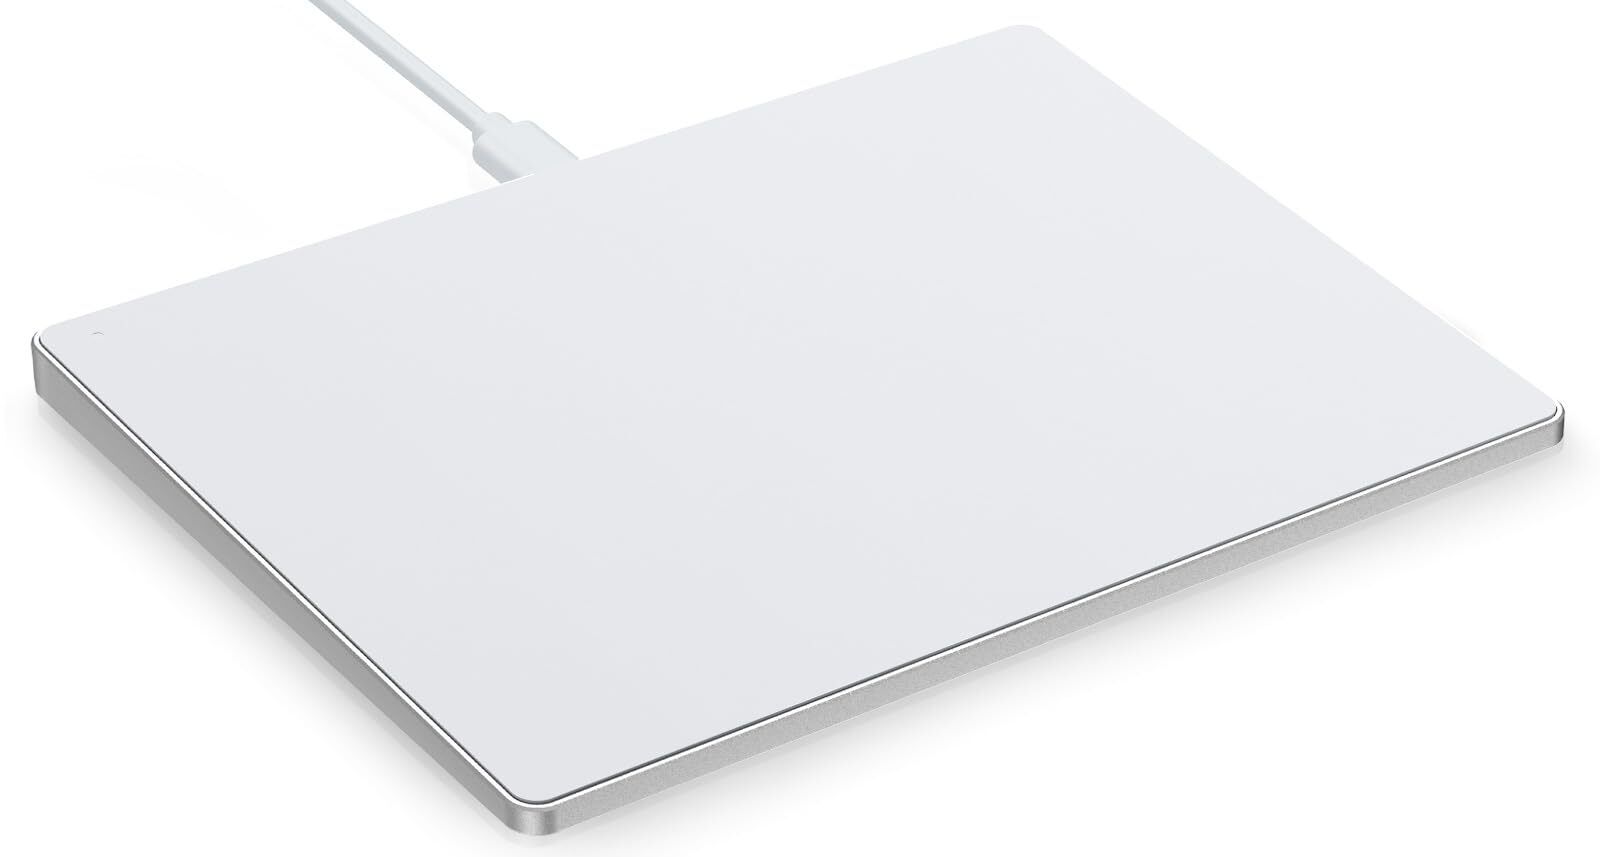 seenda Upgraded Trackpad, Tempered Glass Surface with Multi-Touch, Aluminum S...